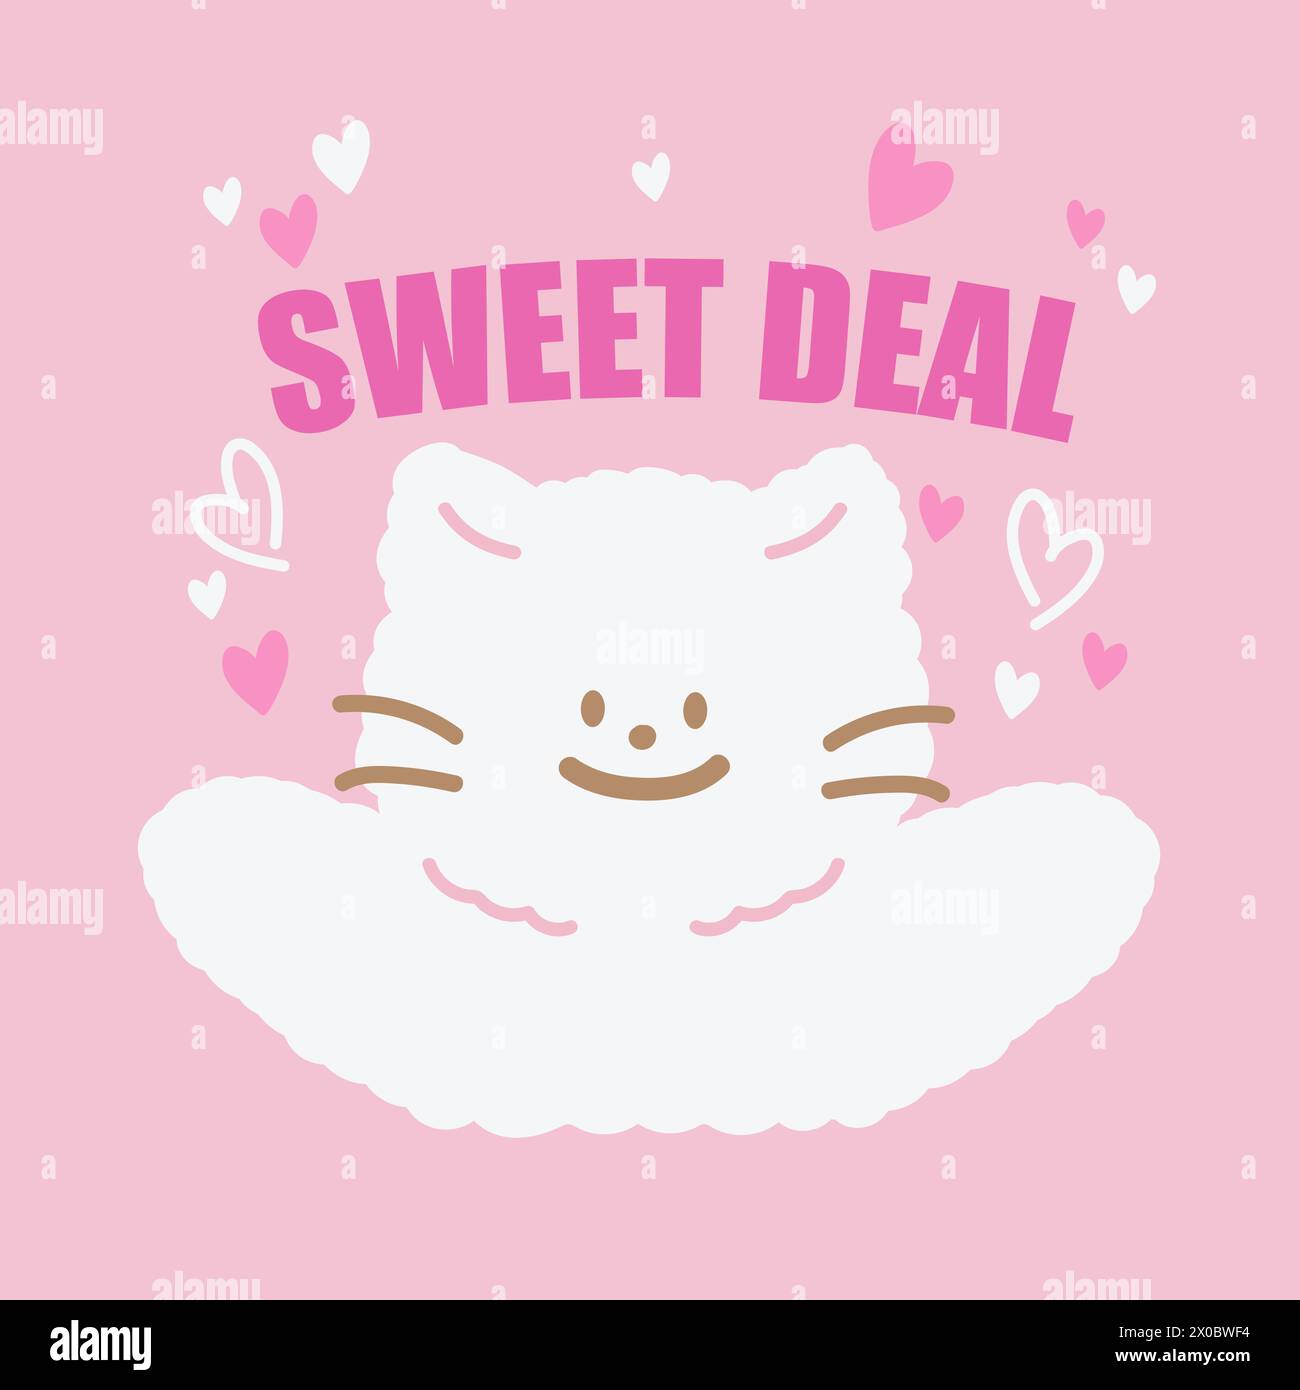 Illustration of cat, hearts, SWEET DEAL letters for online shopping, Valentine deal, sweet dessert, discount, campaign logo, sale background, ads Stock Vector